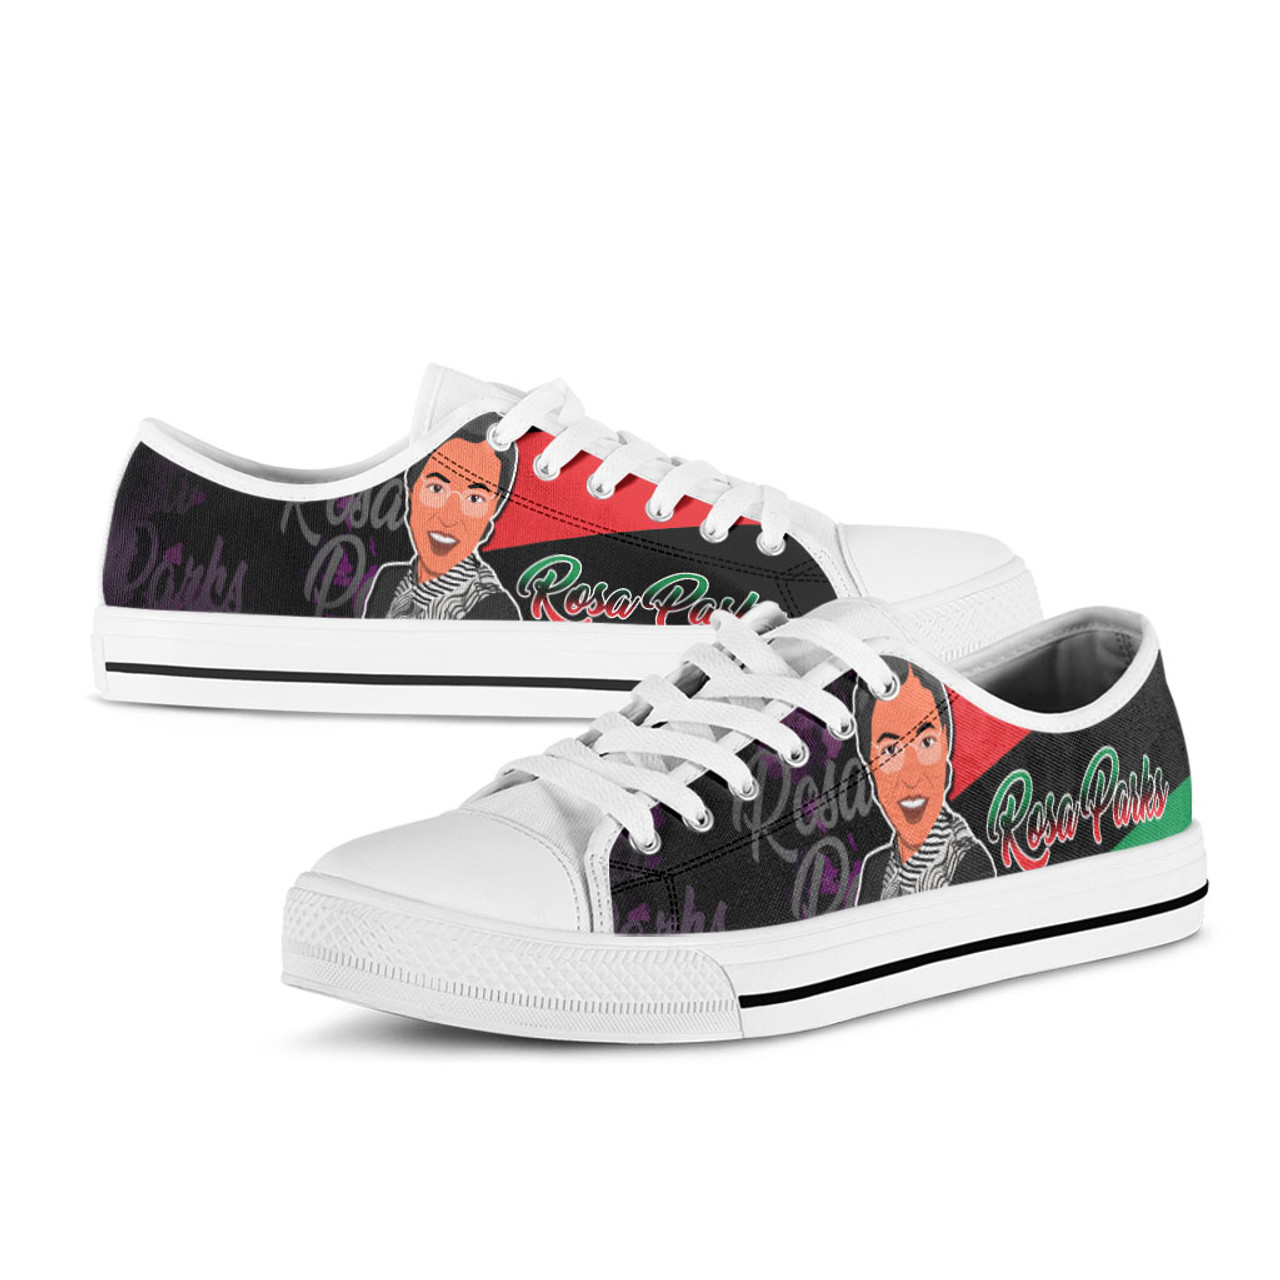 Black History Month Low Top Shoes - Rosa Parks Civil Rights Leader With Pan Africa Flag